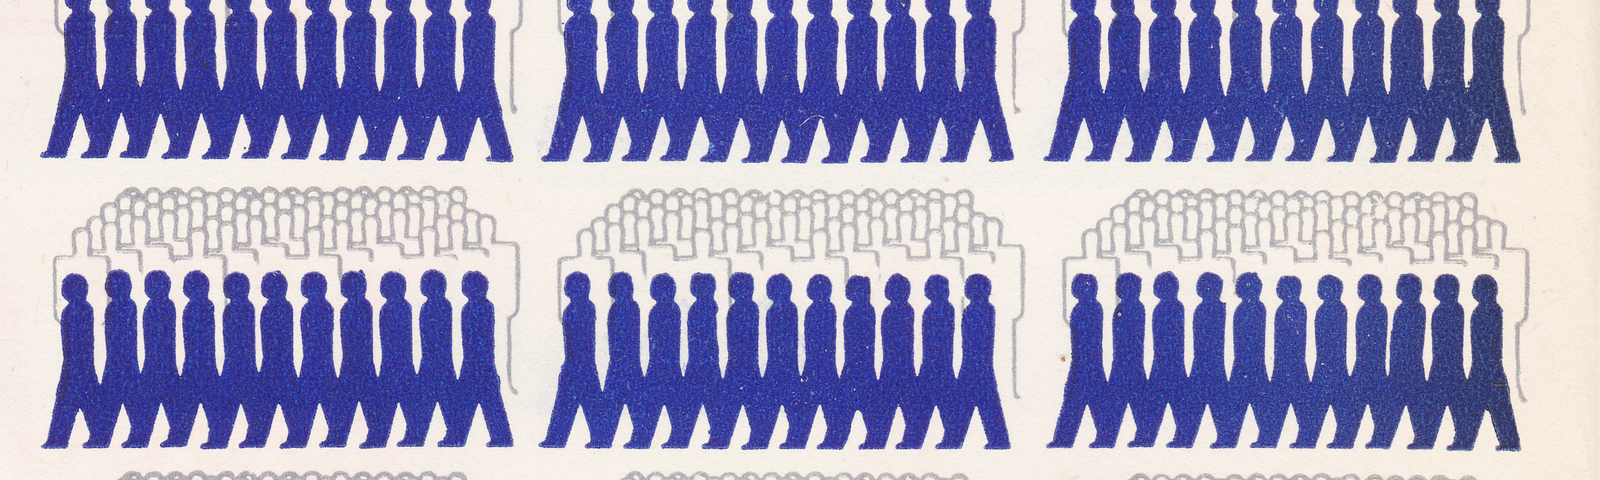 Exploring Isotype Charts: “Our Private Lives”